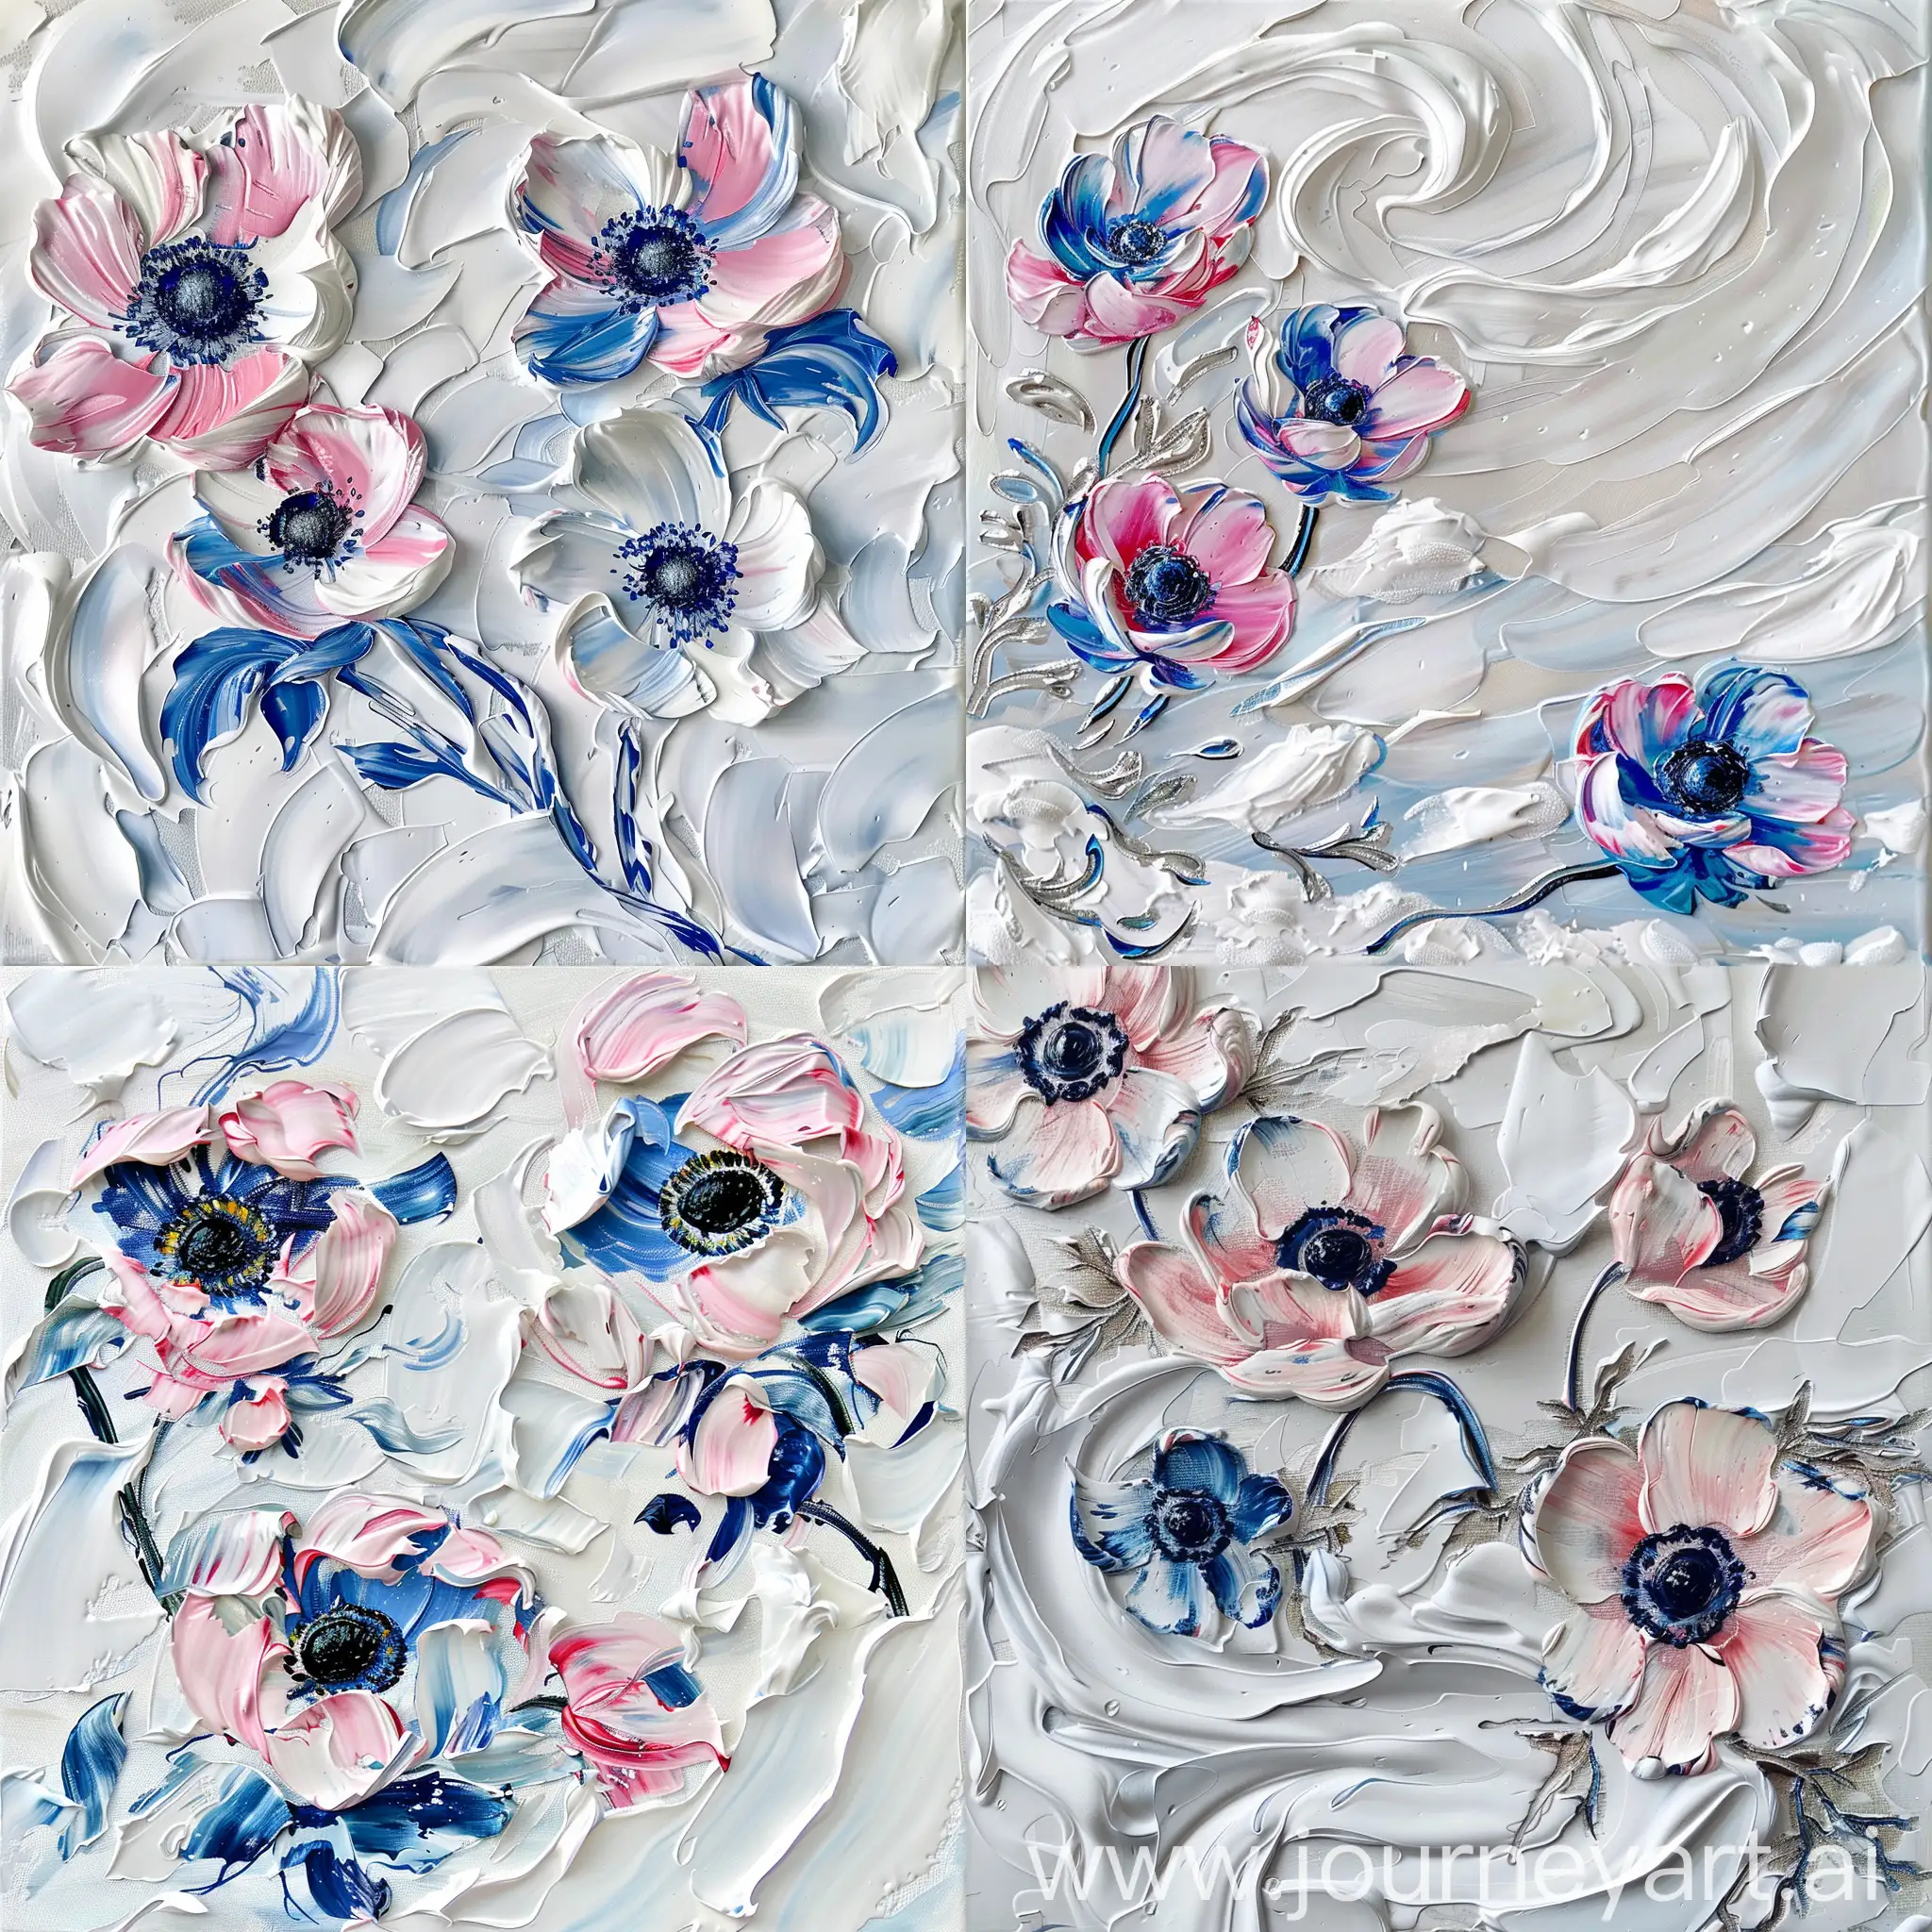 An abstract winter landscape painting featuring a snowy white canvas with delicate, vibrant anemone flowers in shades of pink and blue. The palette knife technique gives the painting a textured and dynamic feel, with swirling strokes of oil paint. The anemones, usually found in warmer climates, create a striking contrast against the icy winter backdrop, symbolizing resilience and beauty in the face of adversity.